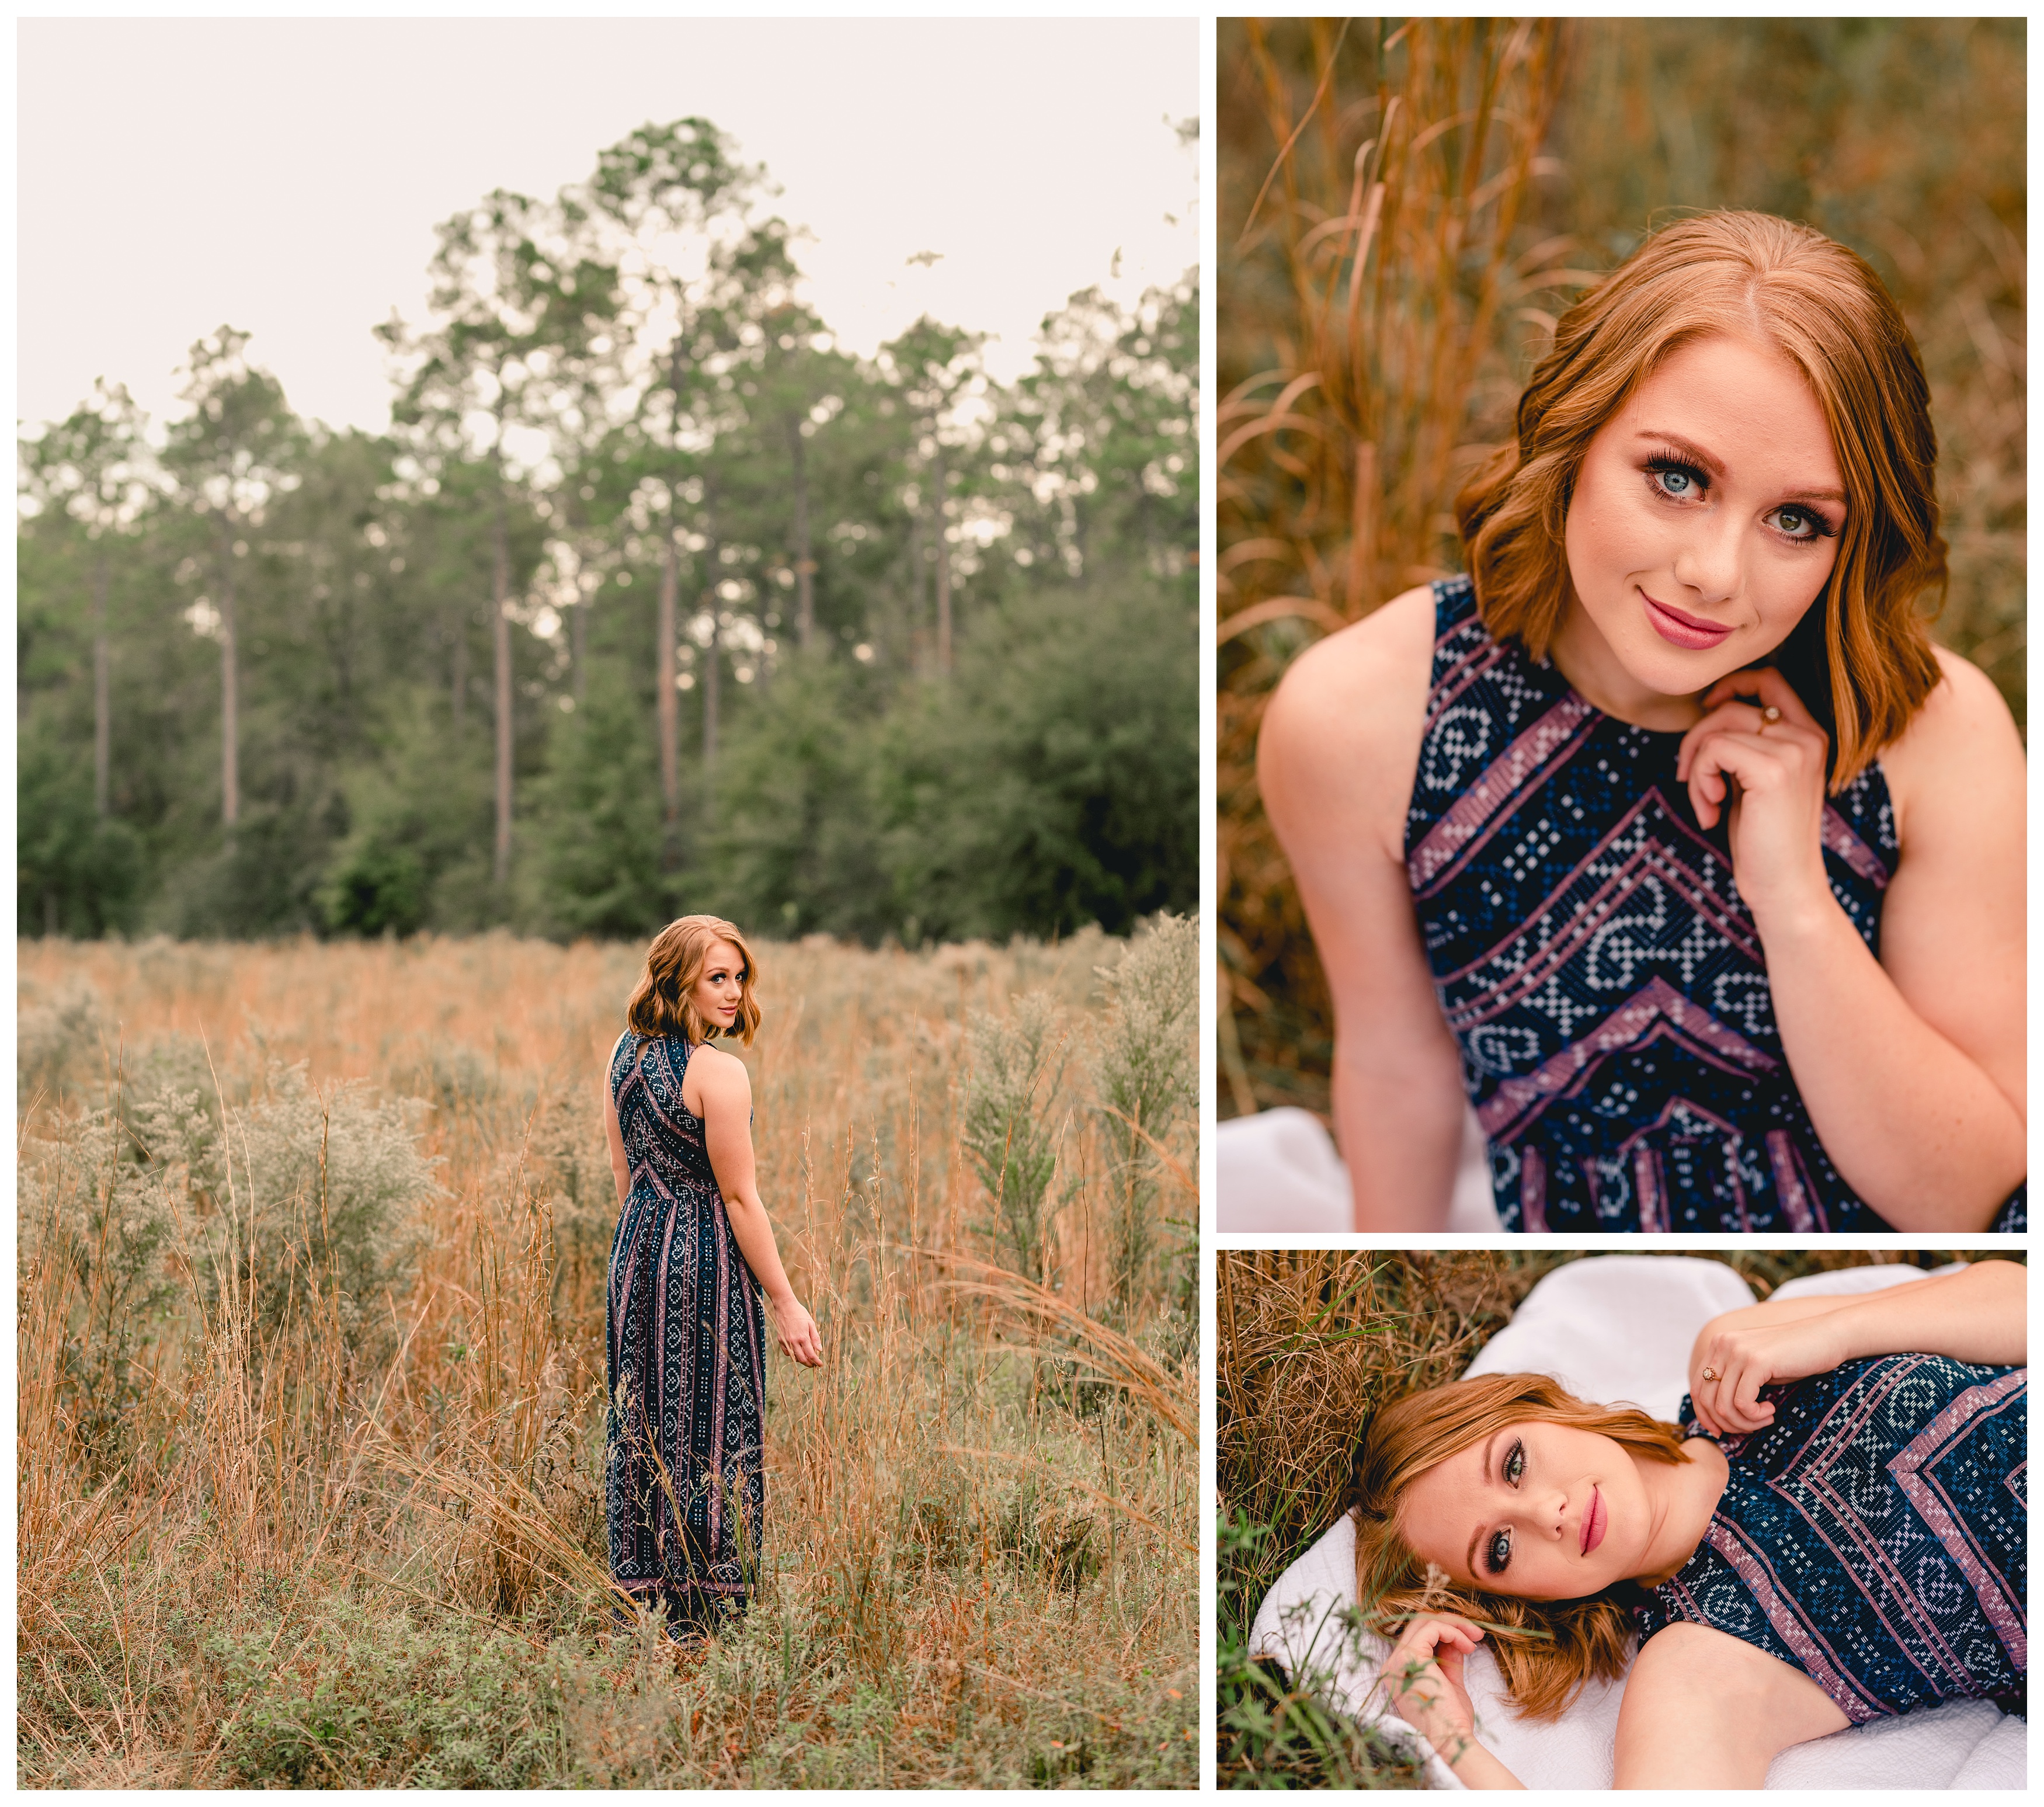 Wide open field senior photographs in Tallahassee, FL. Shelly Williams Photography